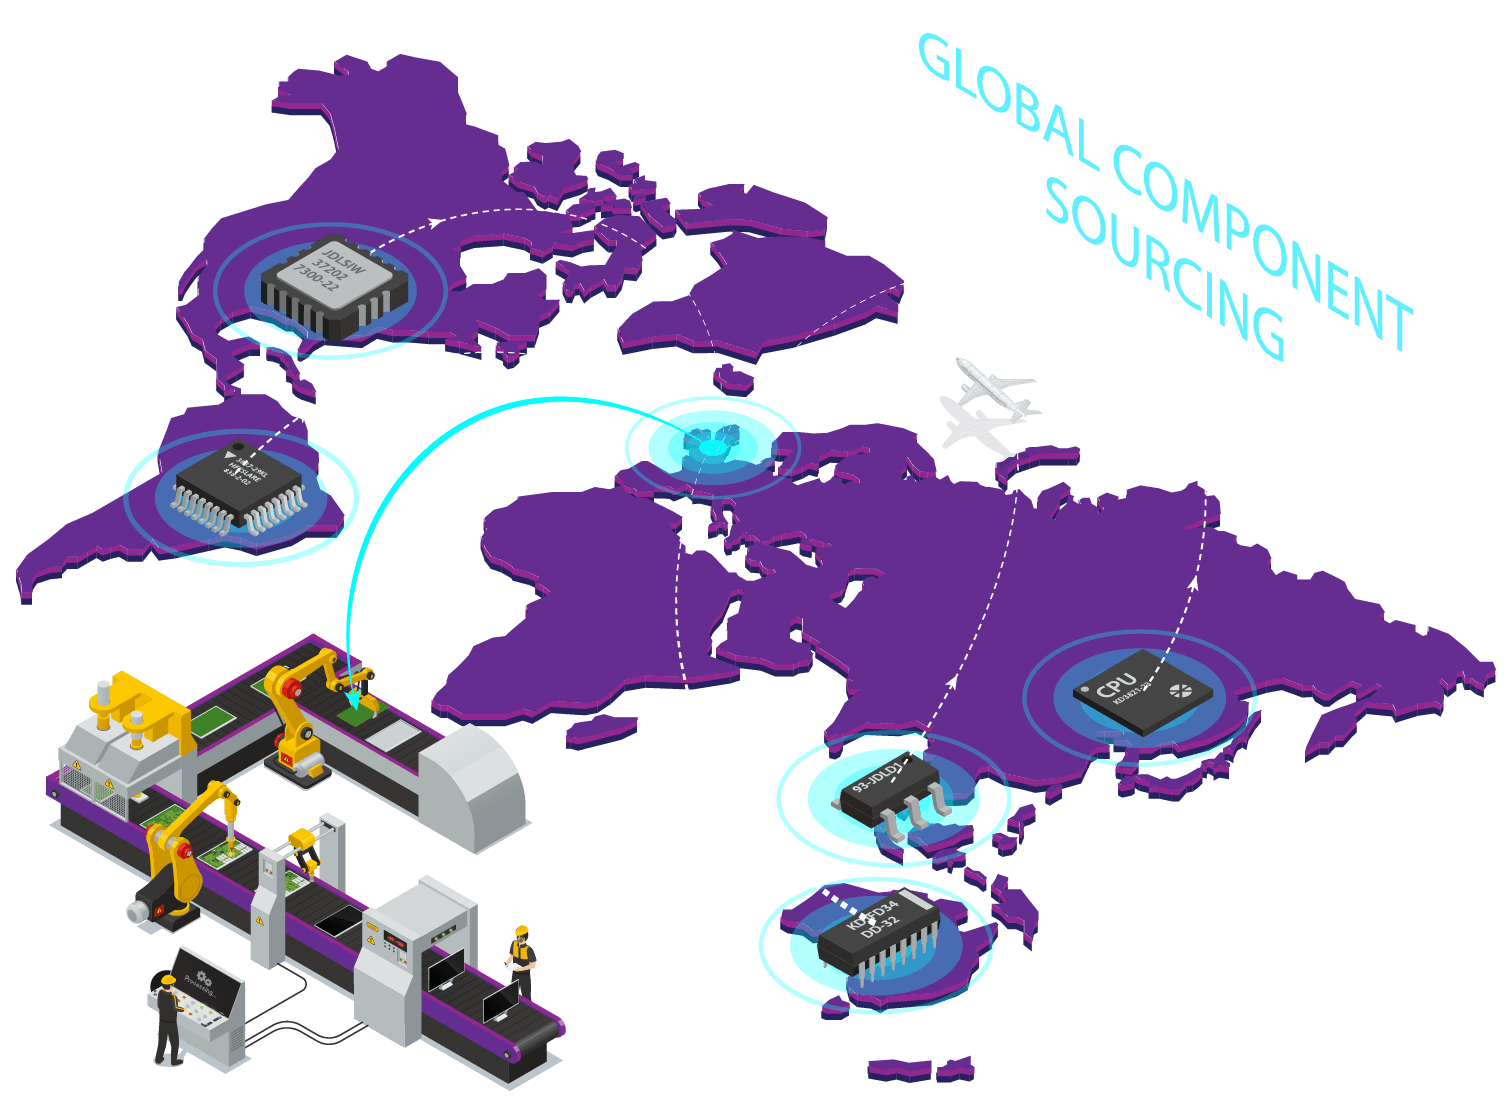 11global component sourcing for mobiles (1)